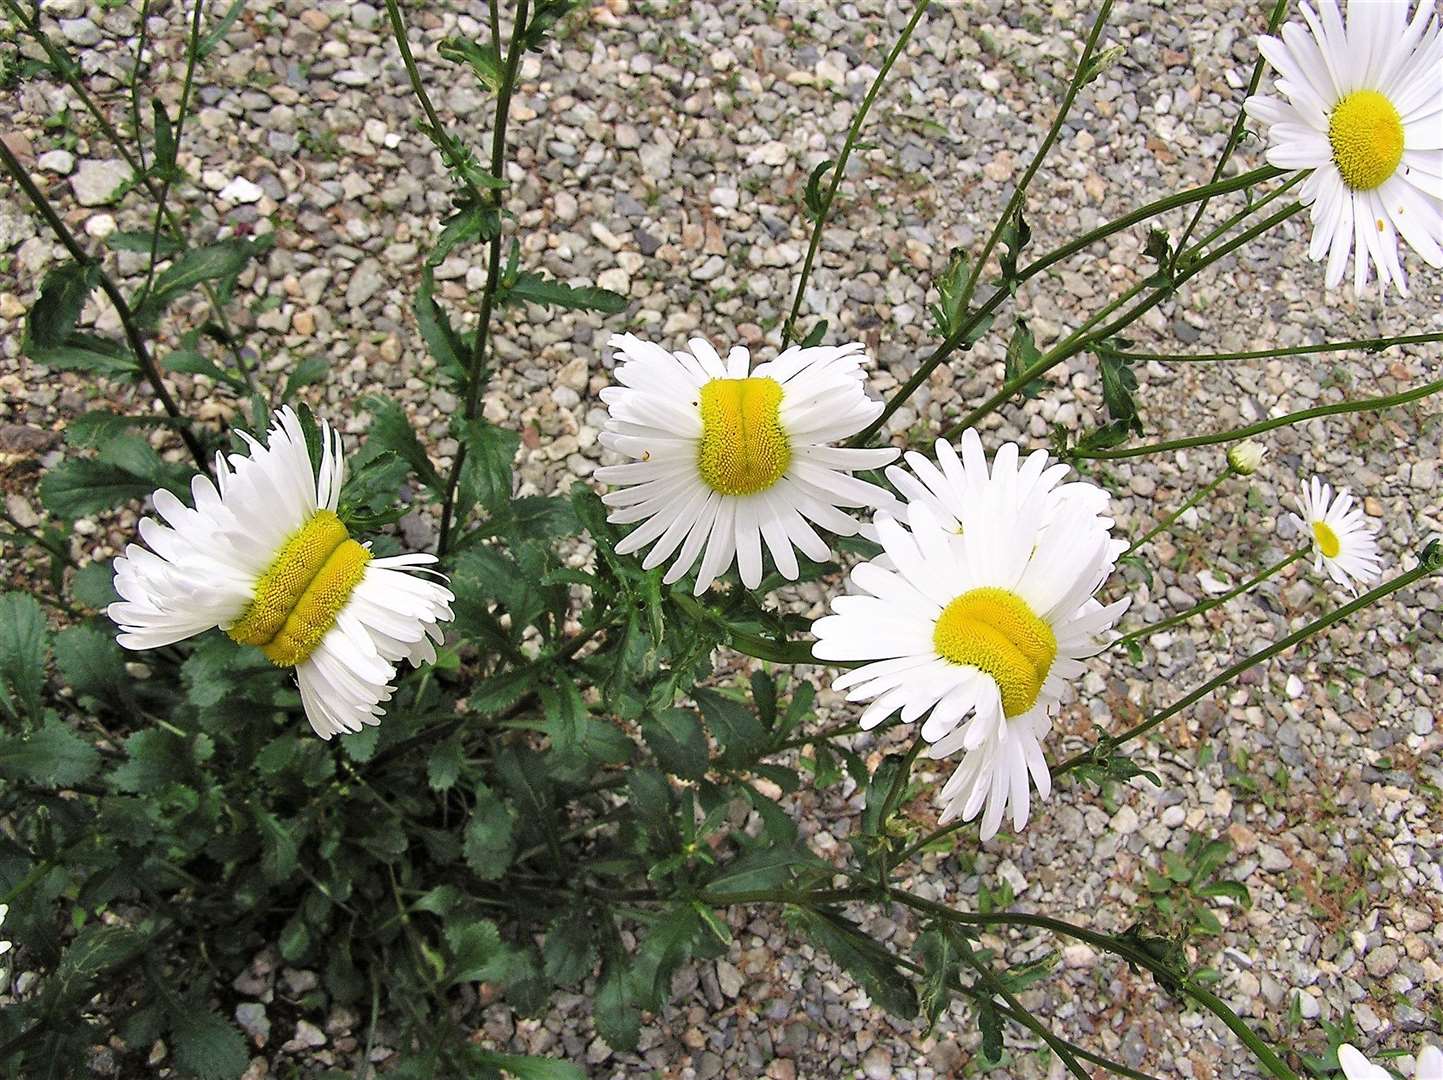 Images of daisies reportedly found near the Fukushima power plant went viral.